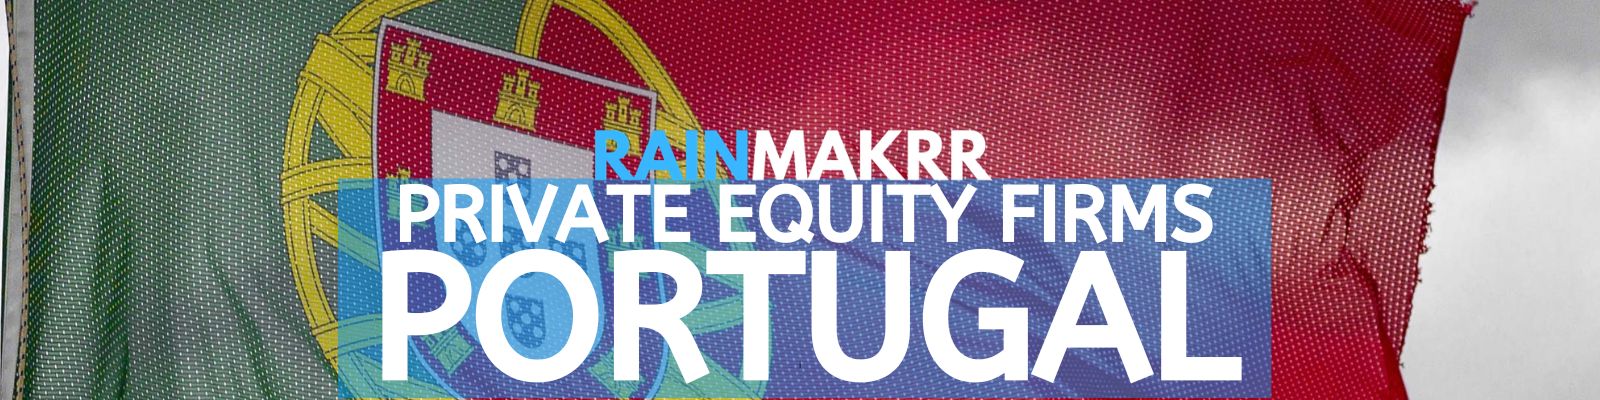 Top portuguese Private Equity Firms Top Private Equity Firms Portugal DT